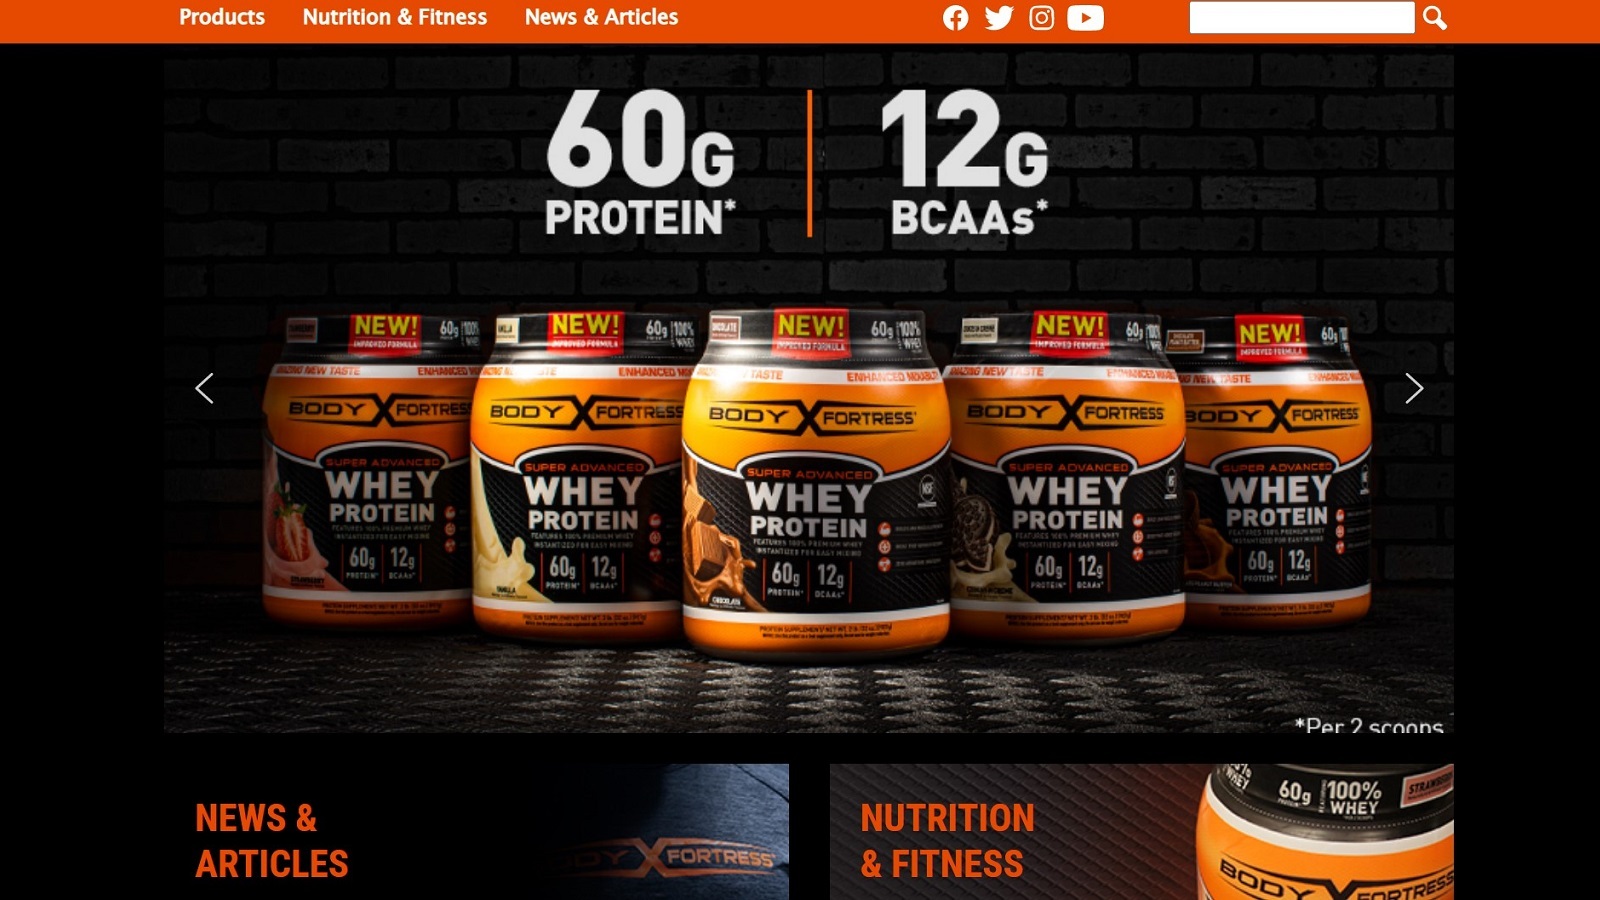 Body Fortress Whey Protein Review: Is It a Good Choice?